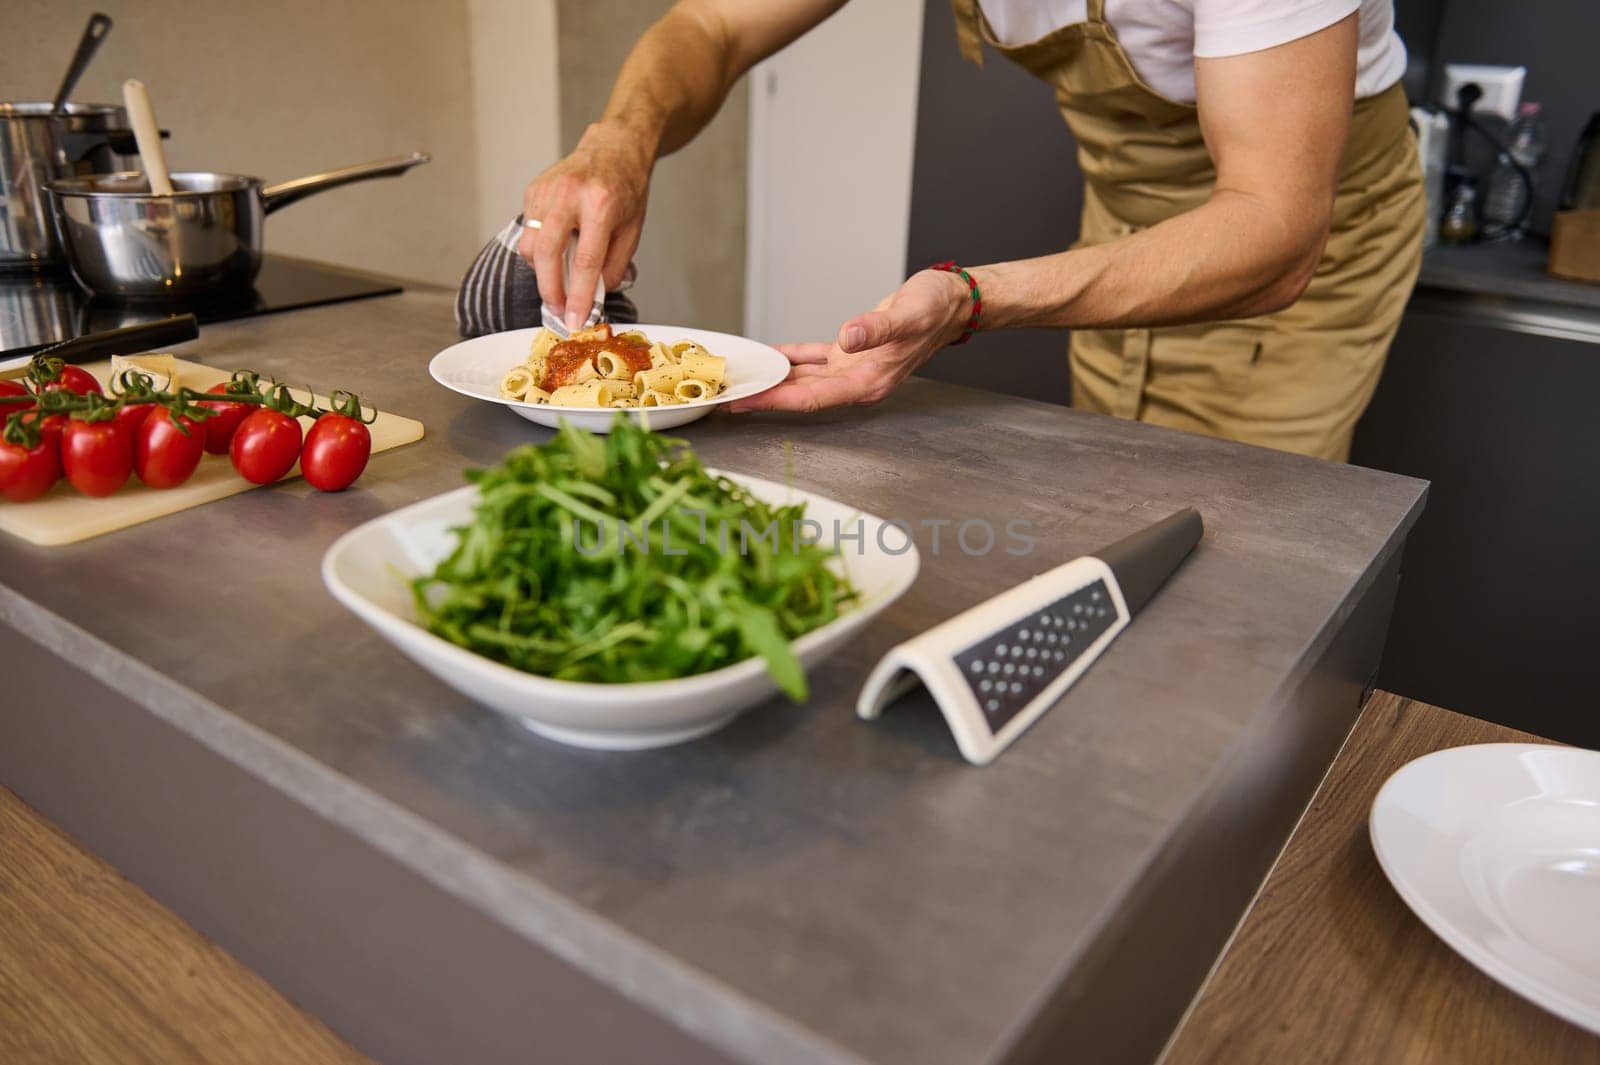 Close-up chef's hands using kitchen towel, wiping away traces of tomato sauce on a plate of freshly prepared Italian pasta. Ingredients and kitchen utensils in the kitchen table on blurred background.